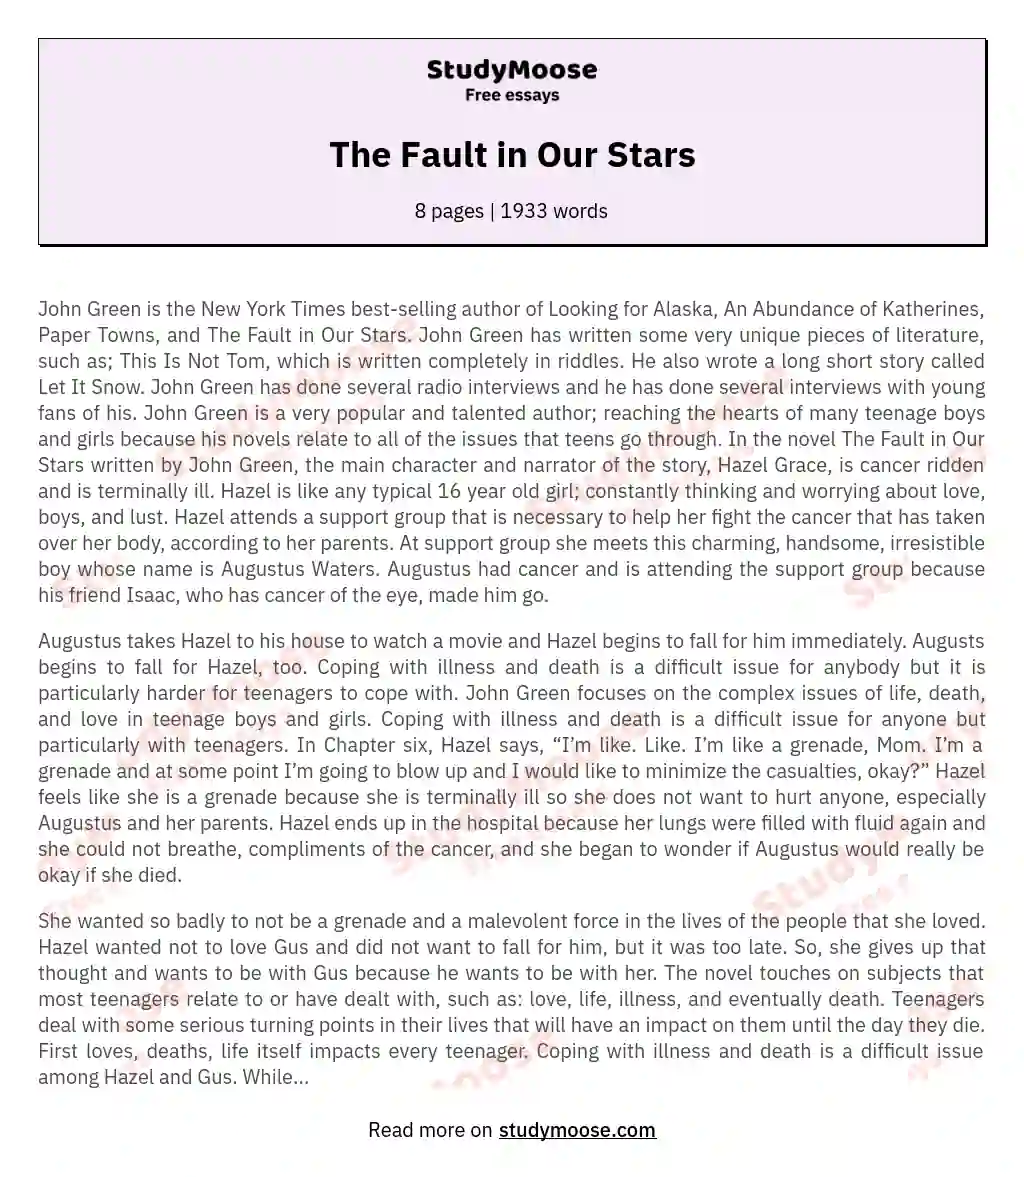 The Fault in Our Stars essay